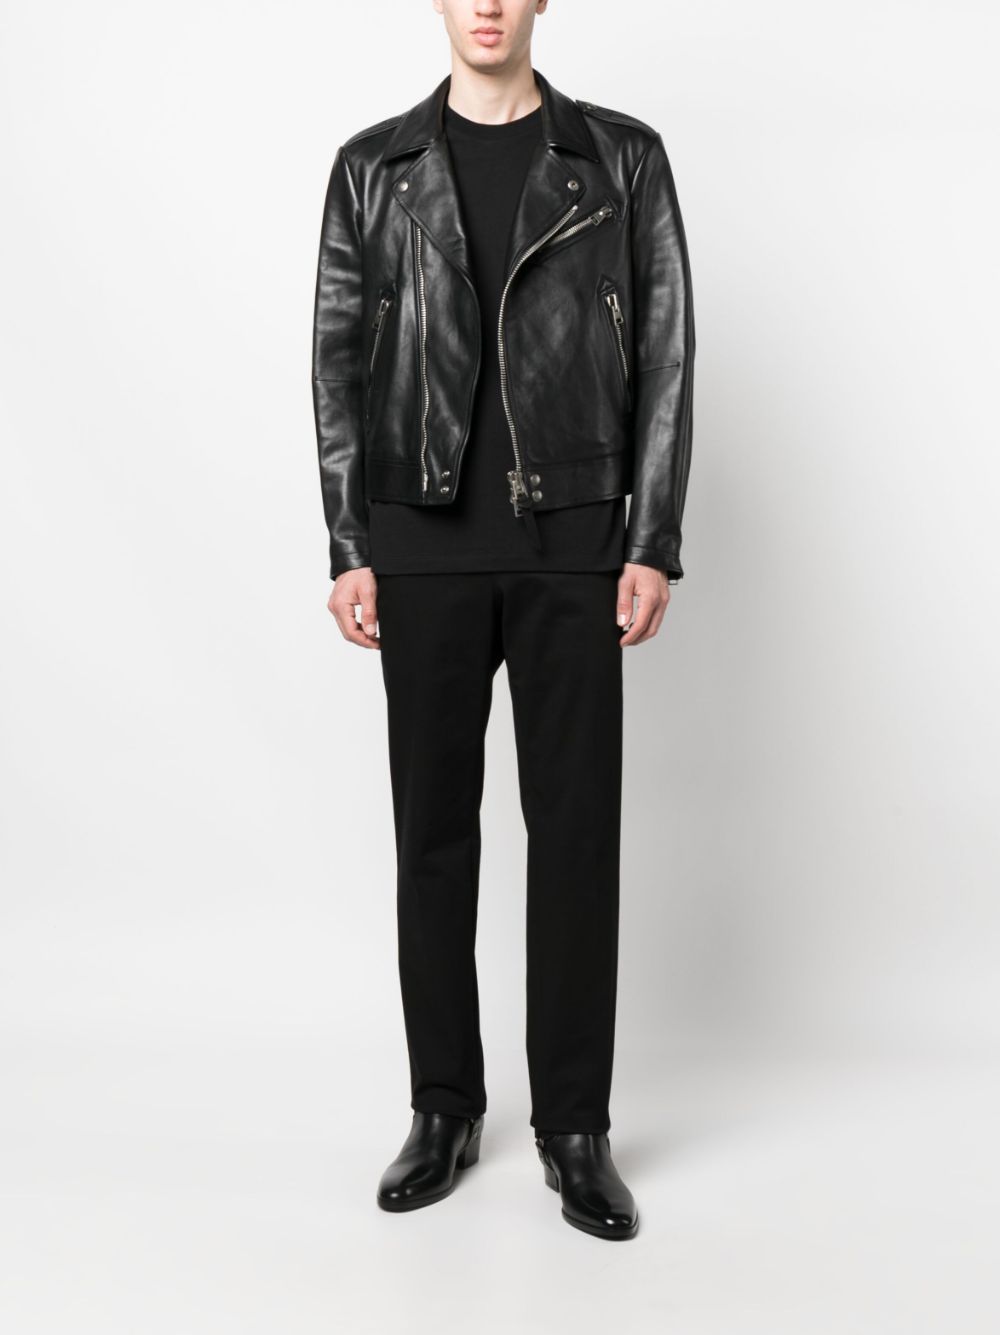 TOM FORD off-centre Leather Jacket - Farfetch